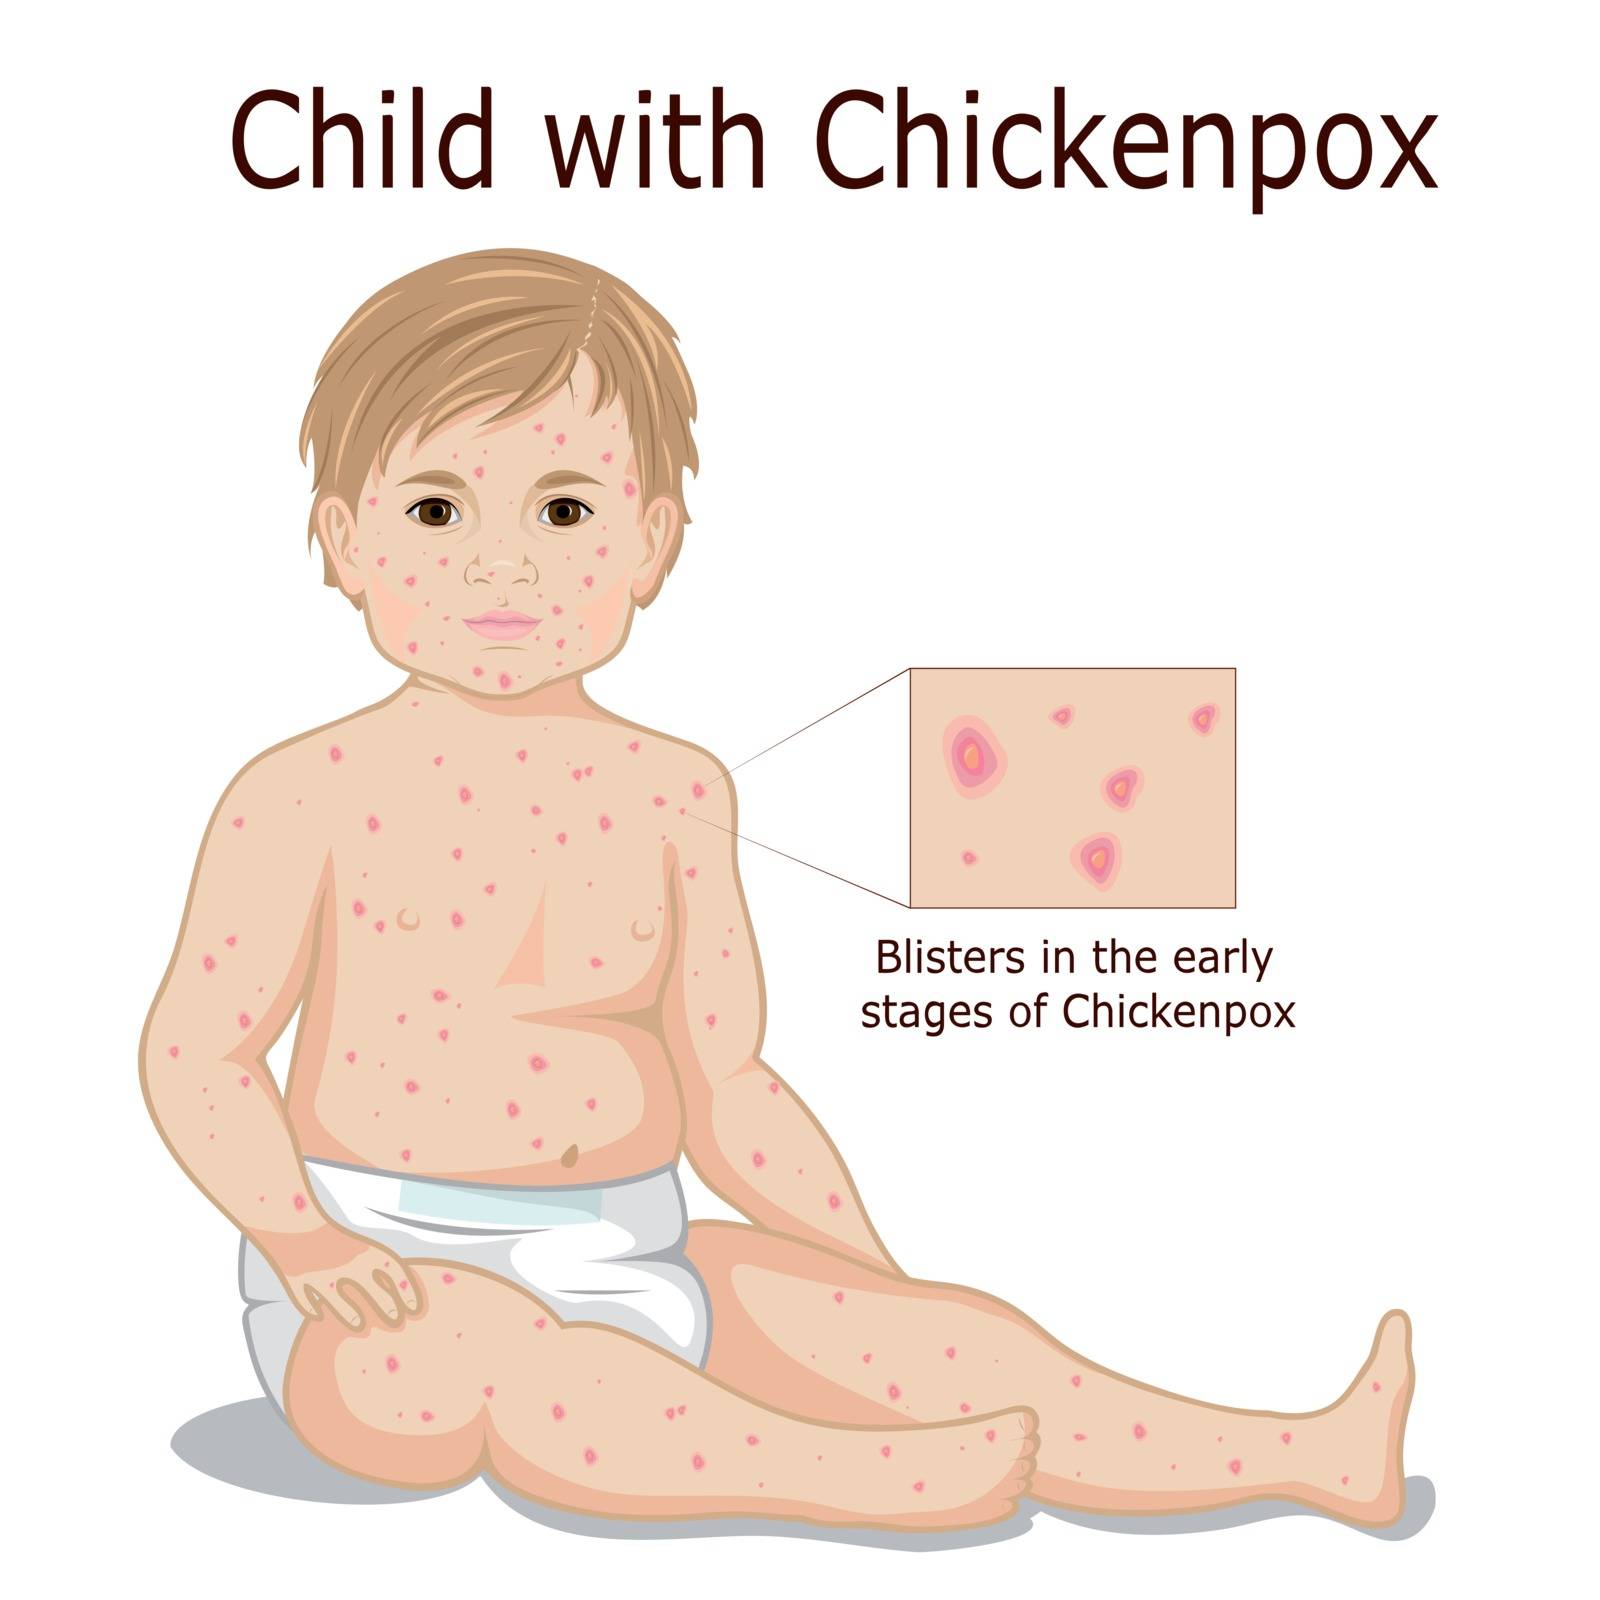 Illustration of child with Chickenpox early stage